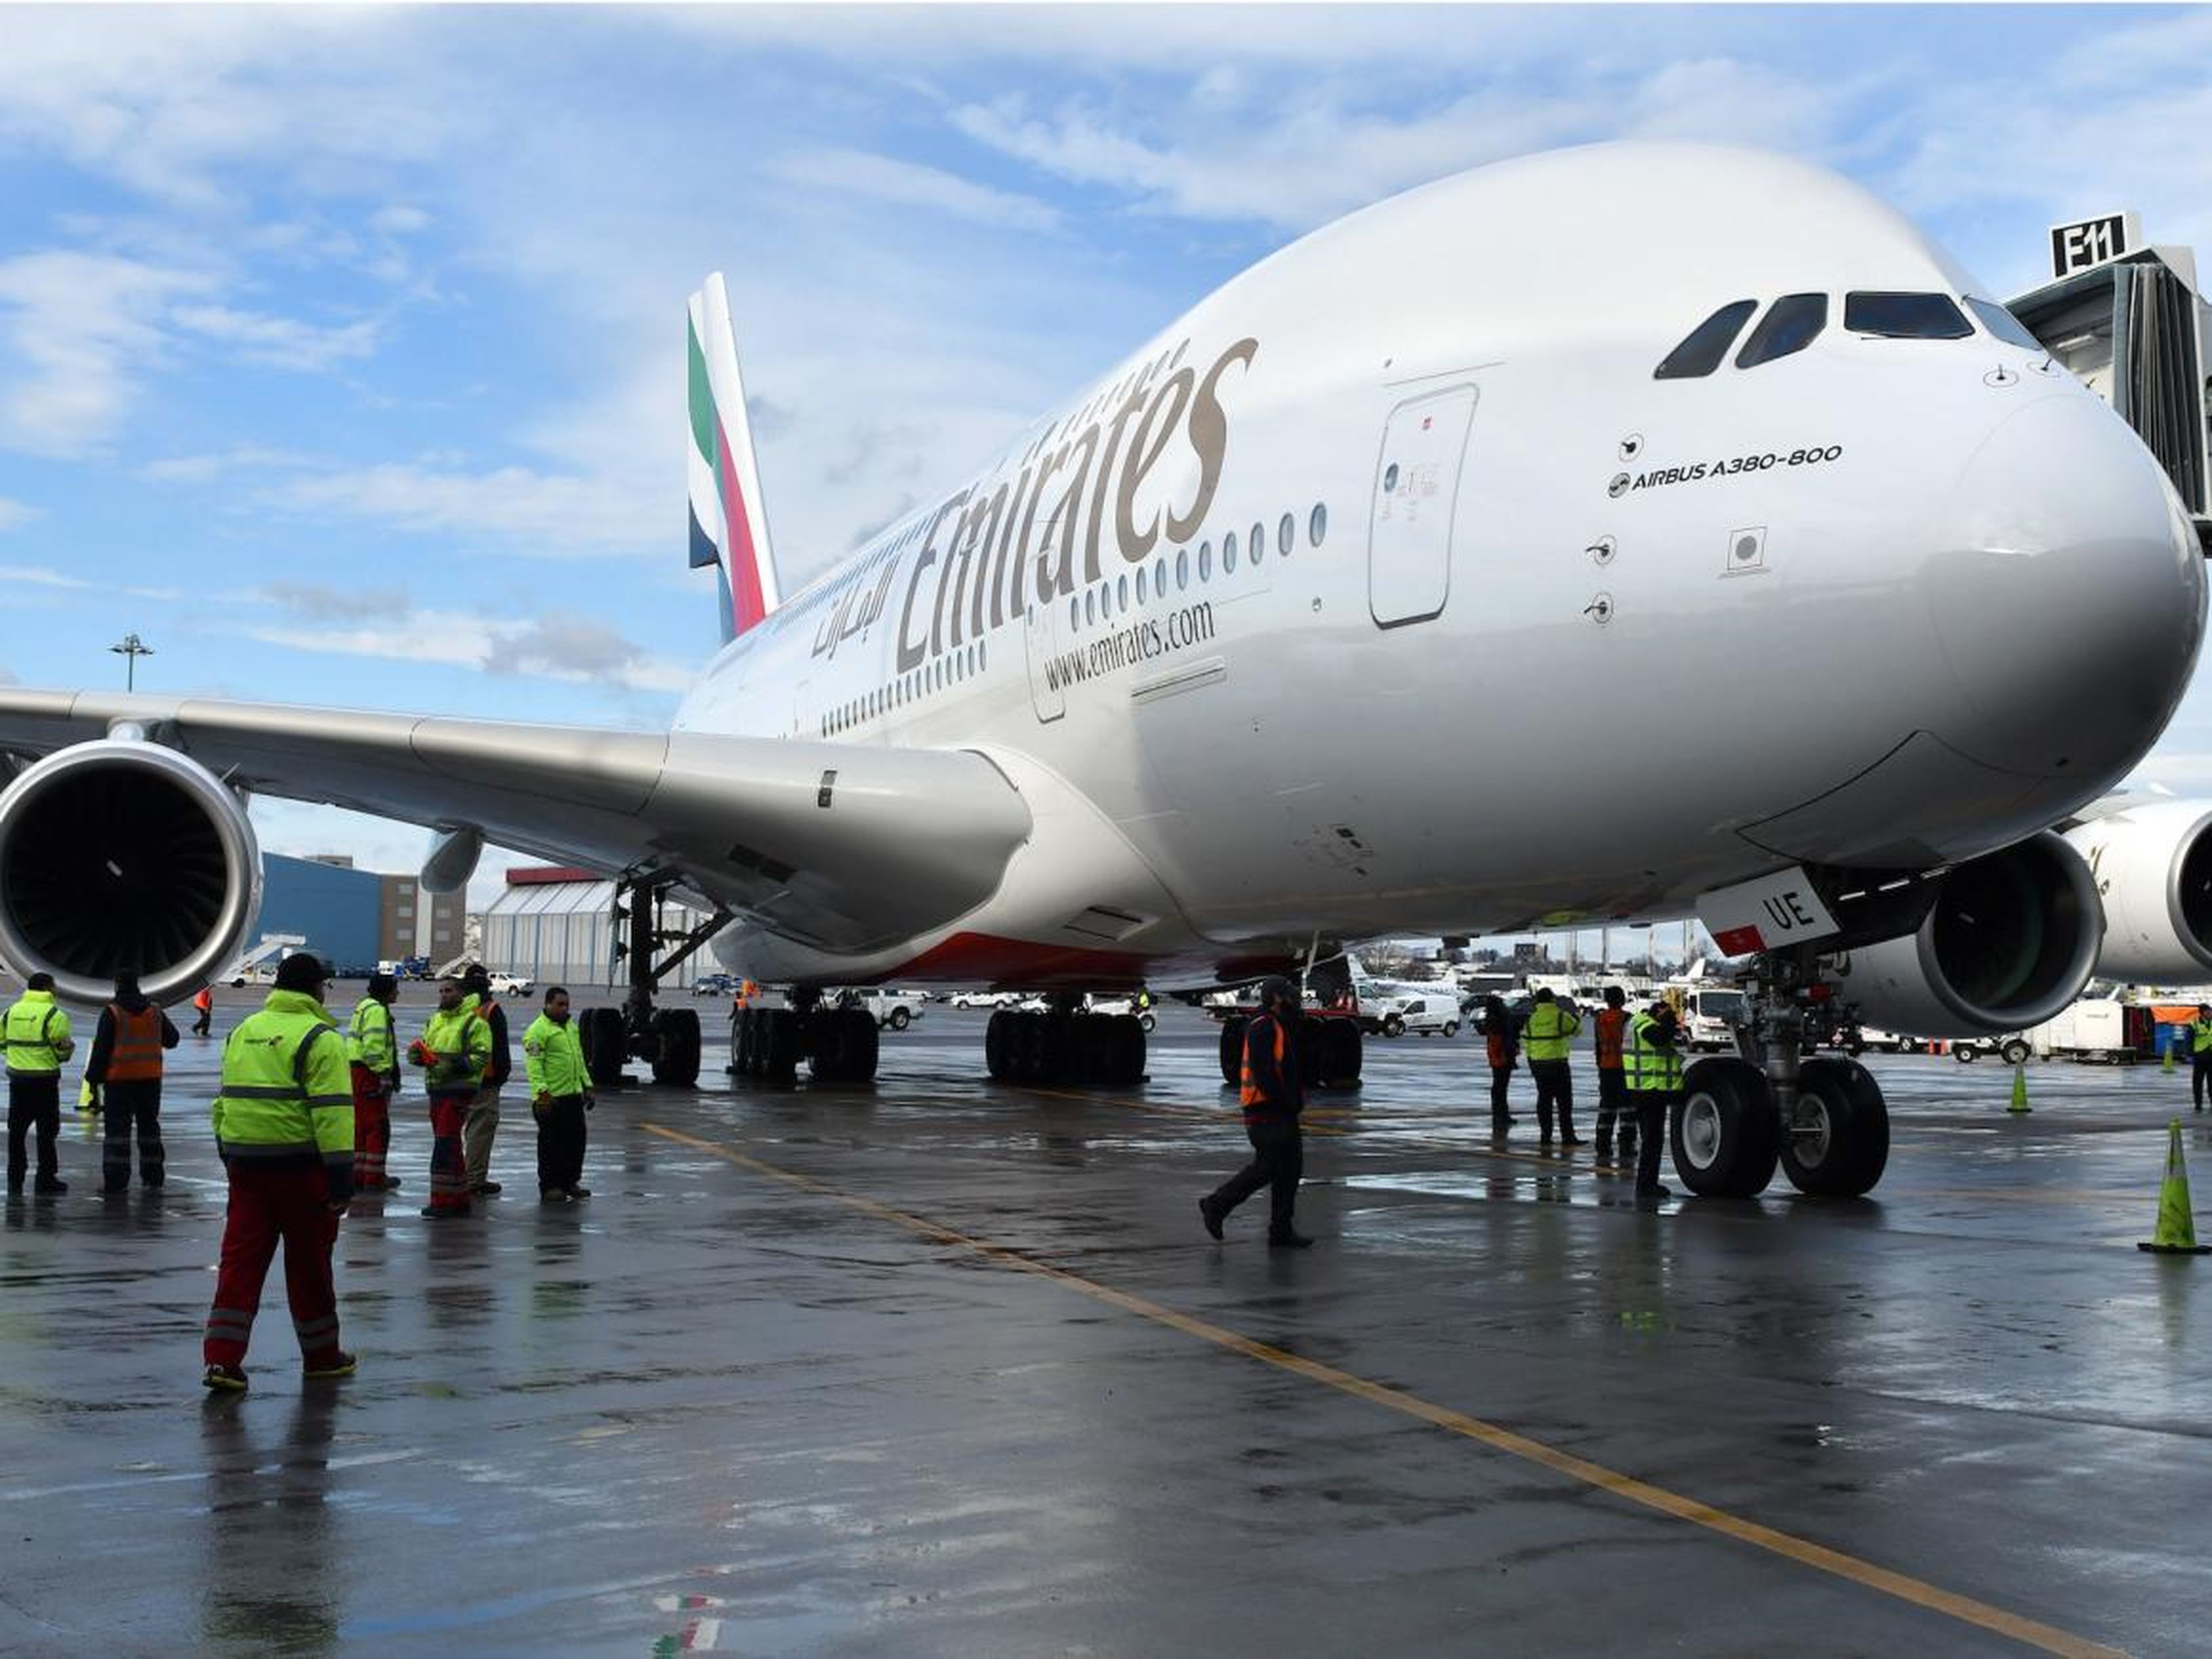 Emirates Airline has denied a report that it is considering a takeover of Etihad.